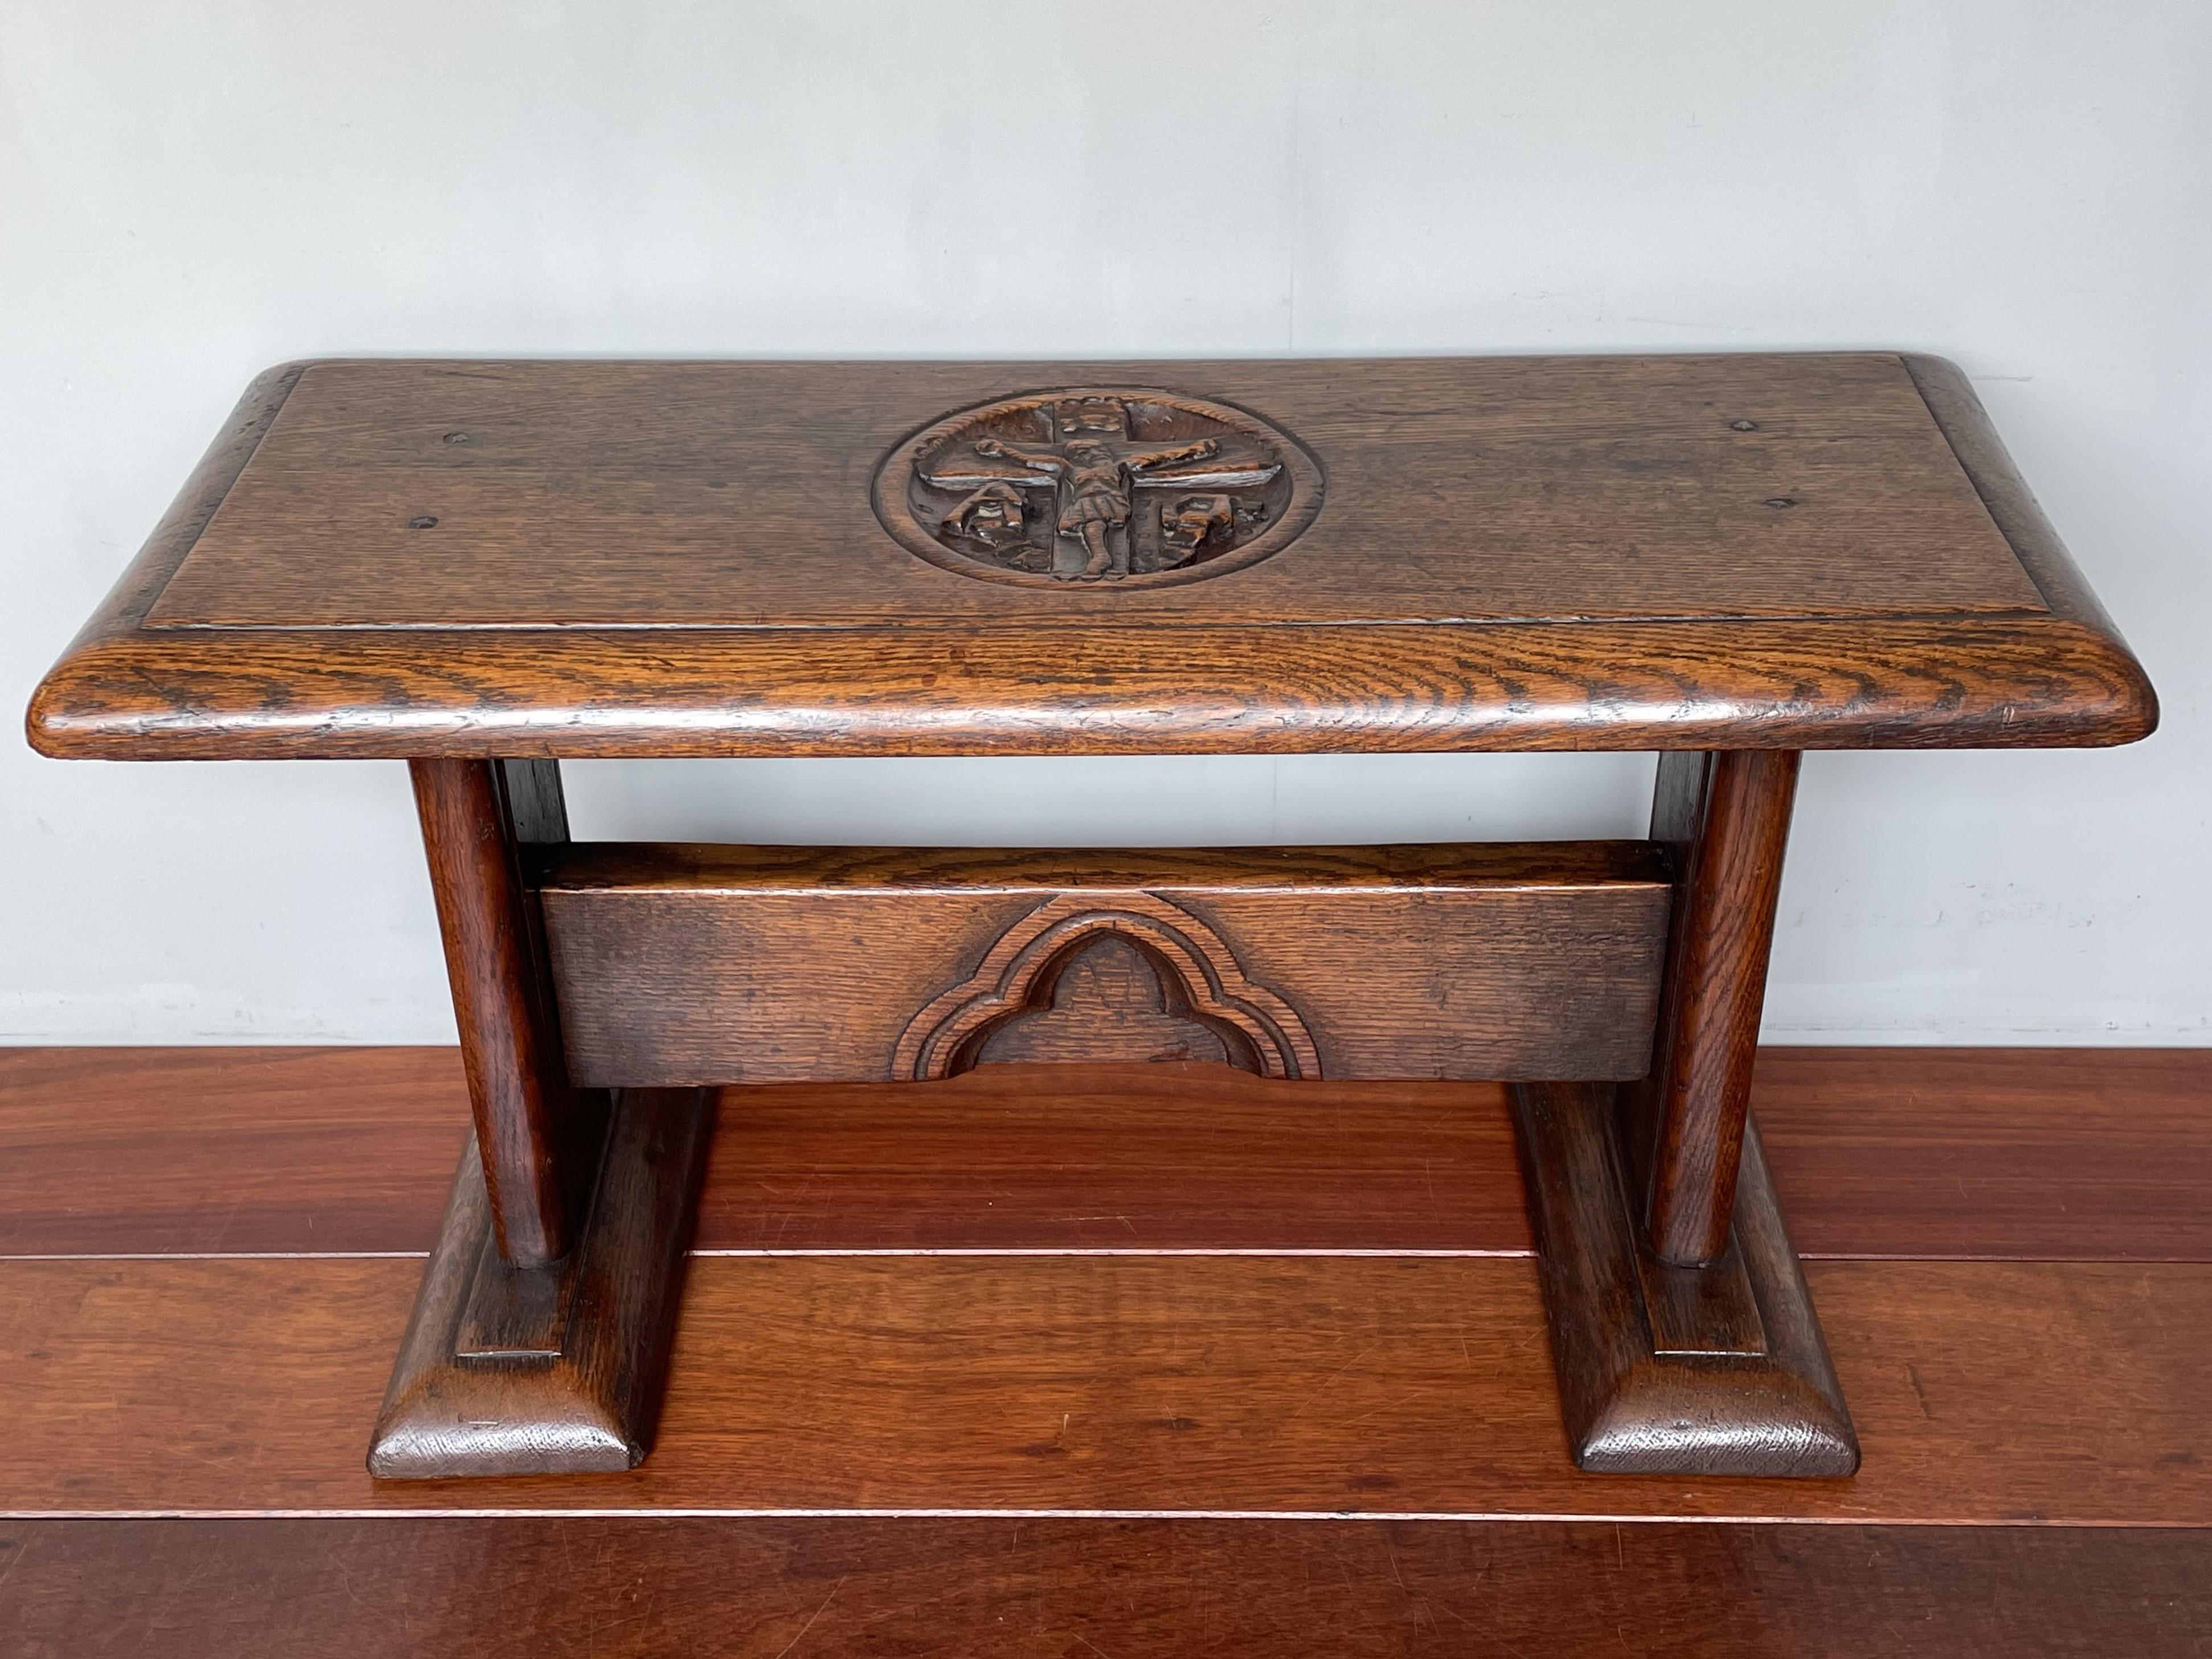 One of a kind Gothic bench with deeply carved crucifix sculpture with A(lpha) and O(mega) letters.

This striking, antique Gothic bench comes with a unique crucifix sculpture in the center with the Christian symbol for Alpha and Omega. In all our